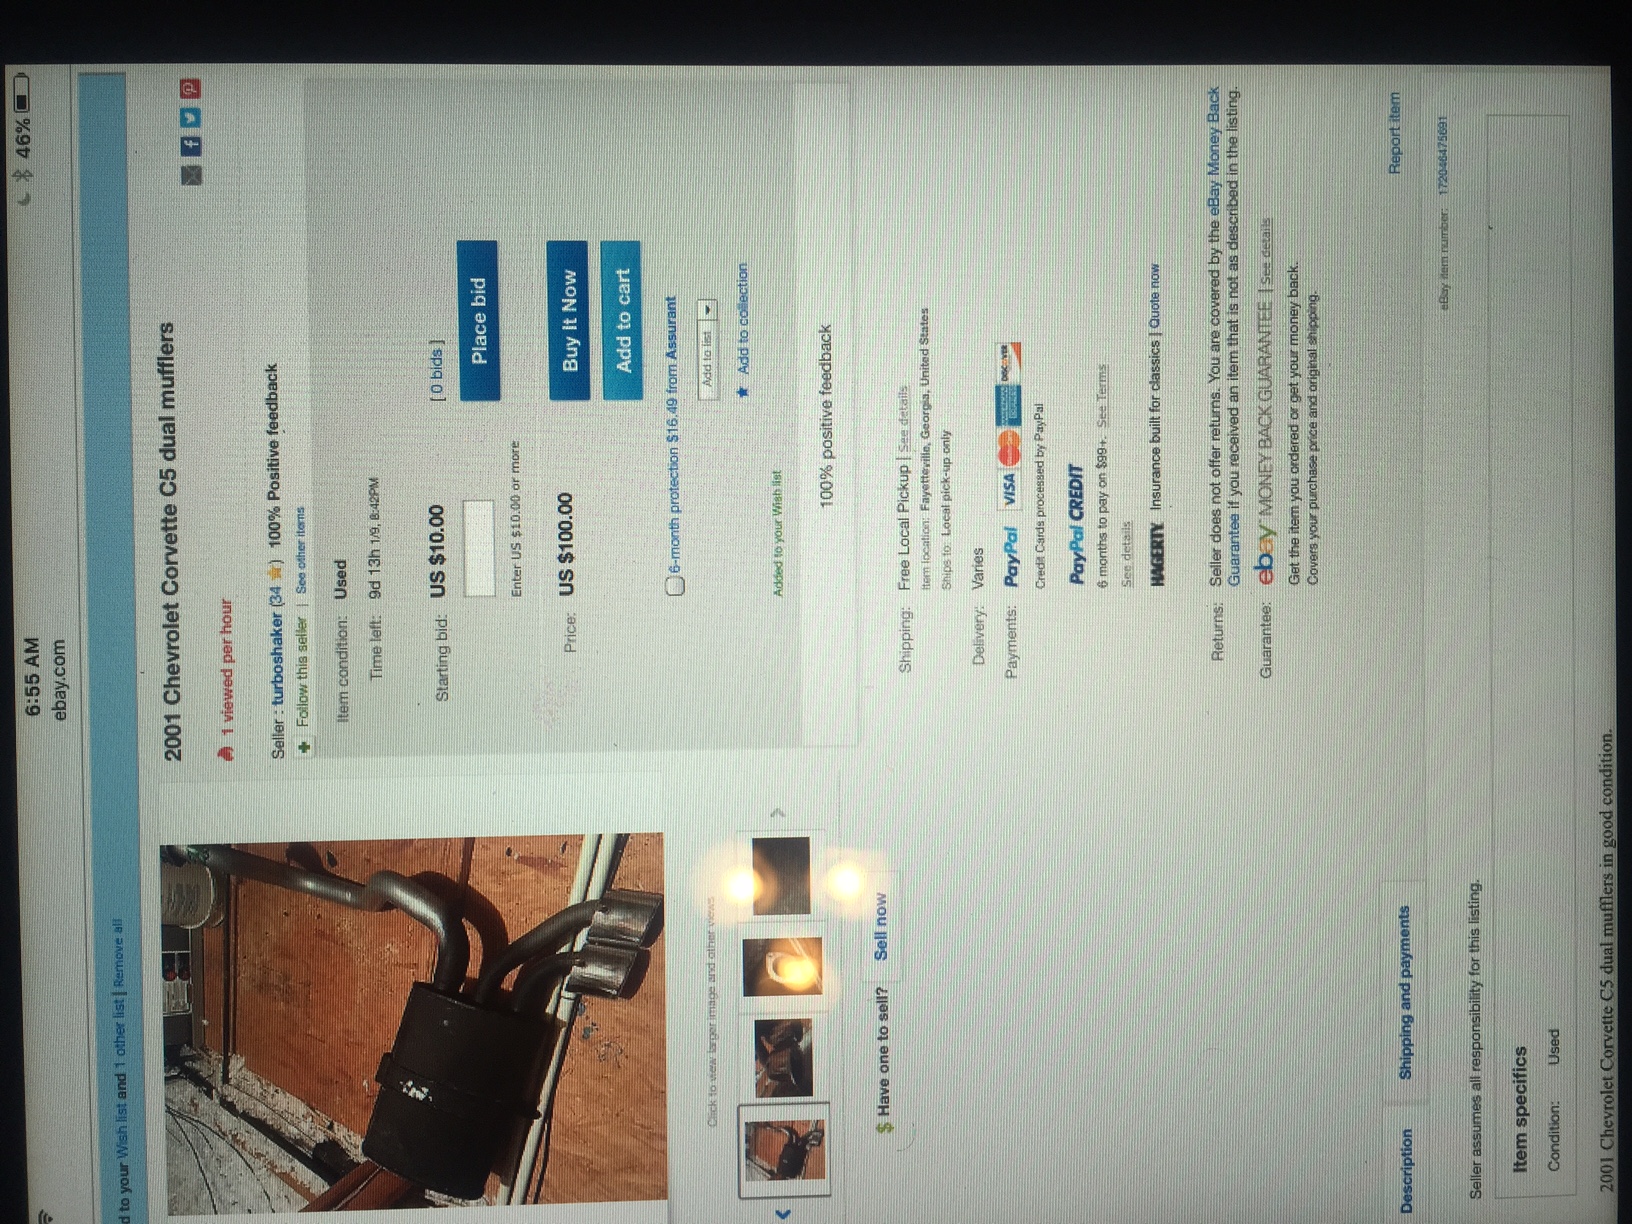 MY OLD EXHAUST BEING SOLD ON EBAY